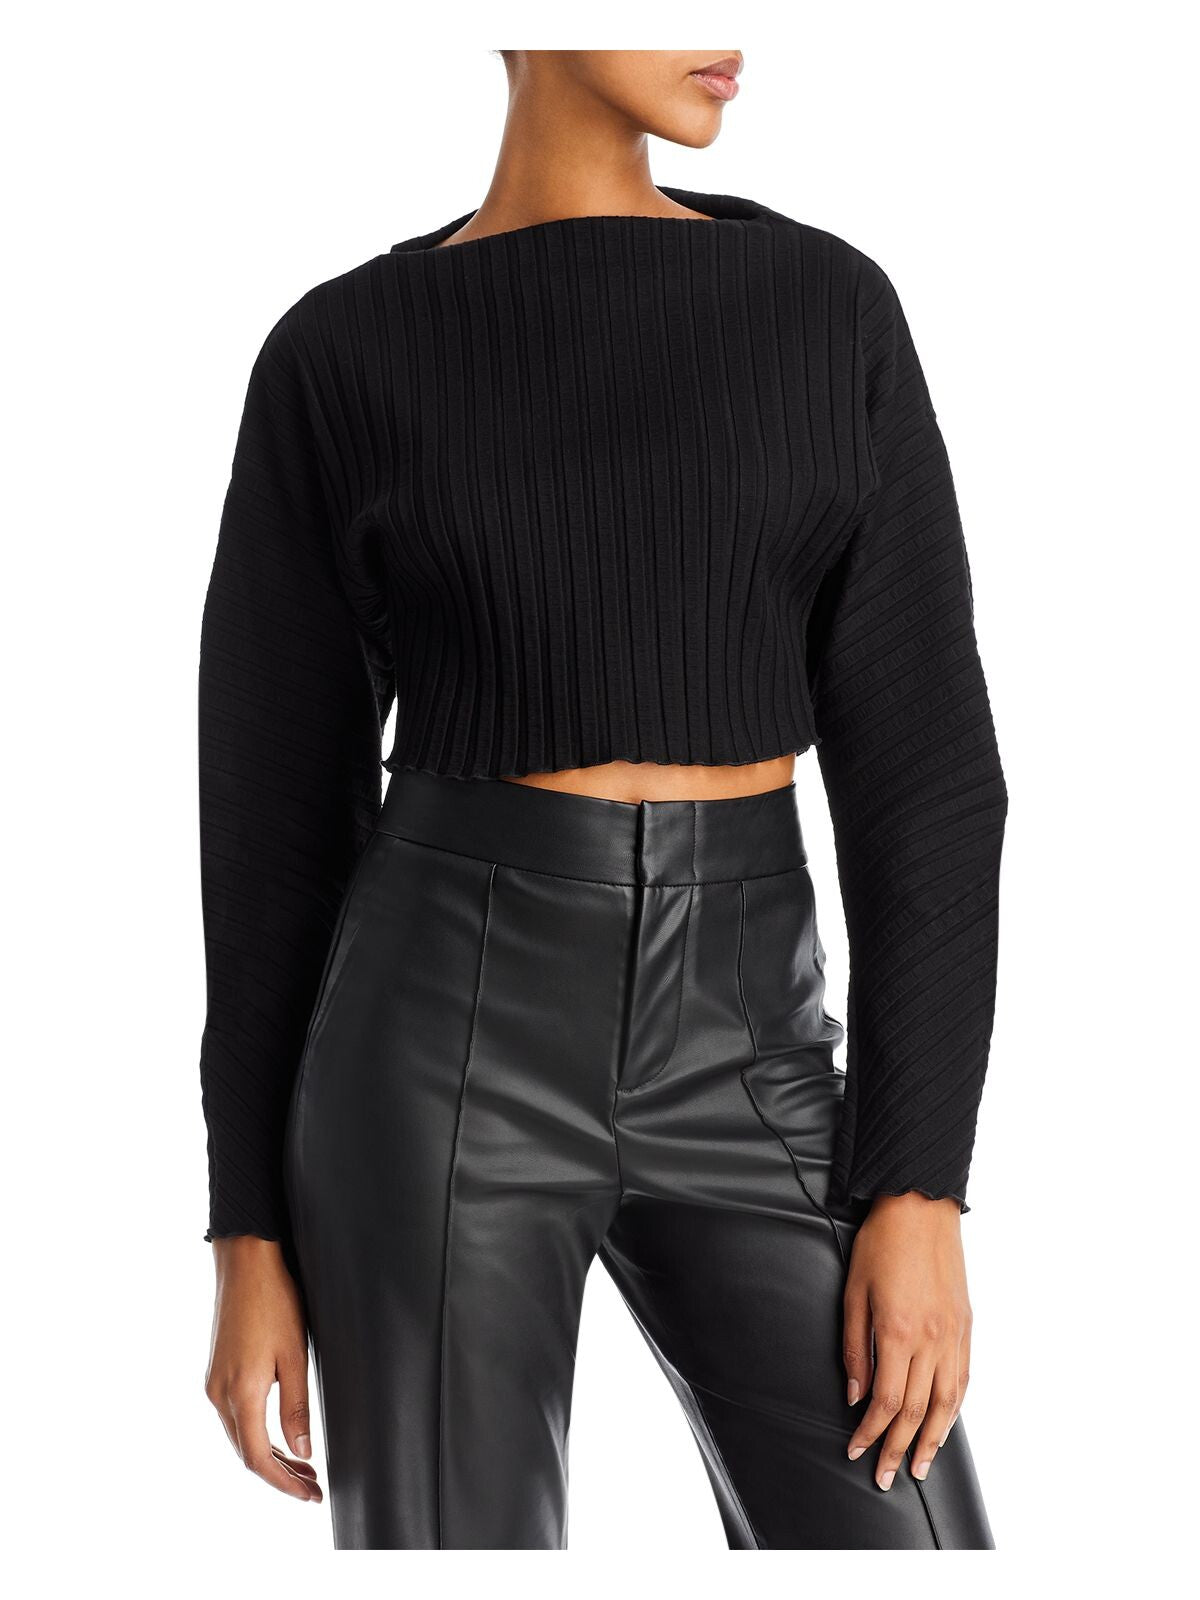 SIMON MILLER Womens Black Ribbed Long Sleeve Boat Neck Crop Top Sweater M